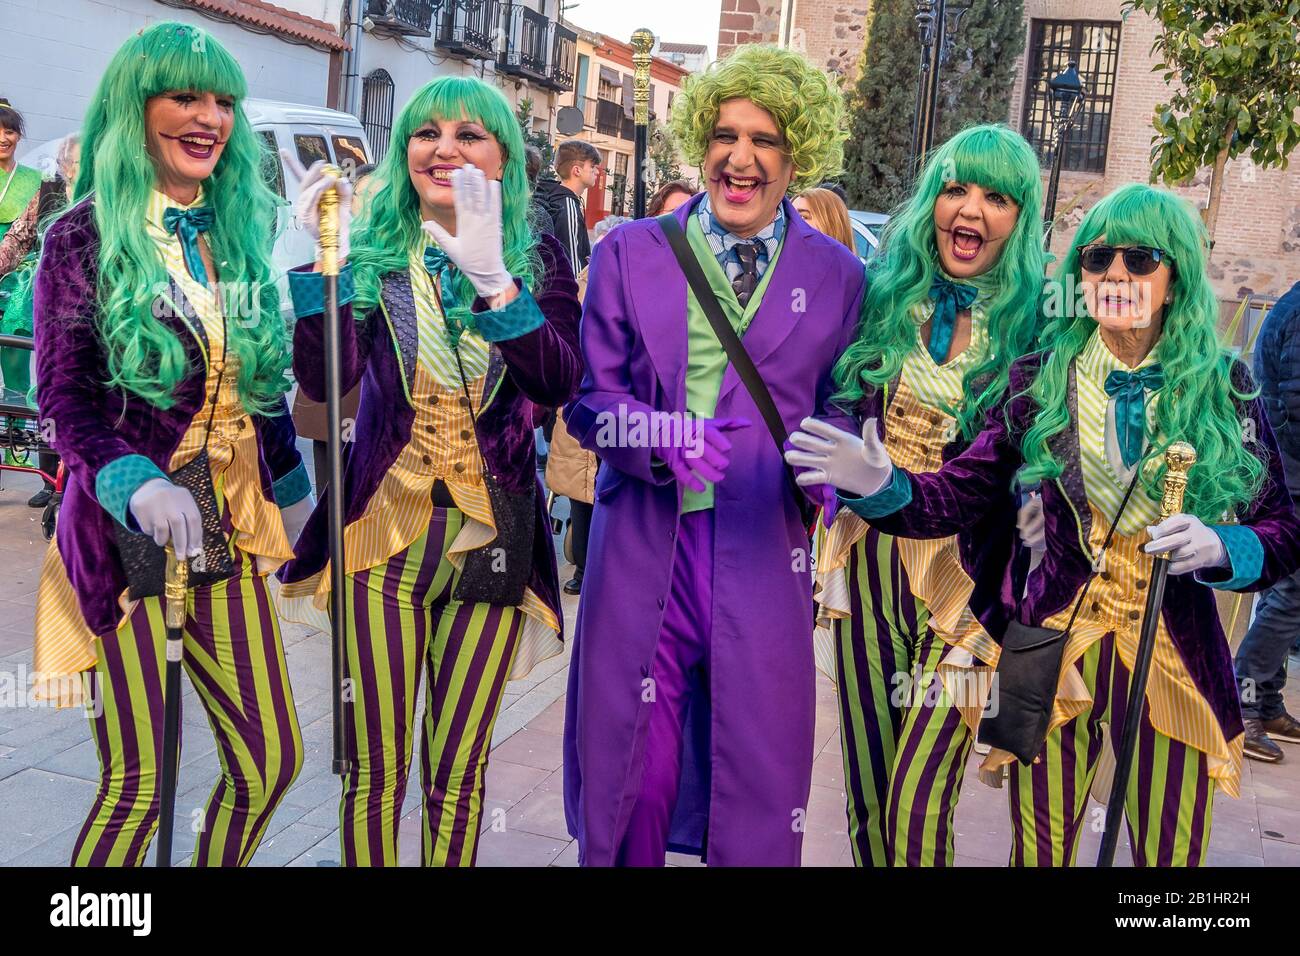 Disguised people at Street carnival parade  Herencia, Castile-La Mancha, Spain February, 22, 2020 Stock Photo